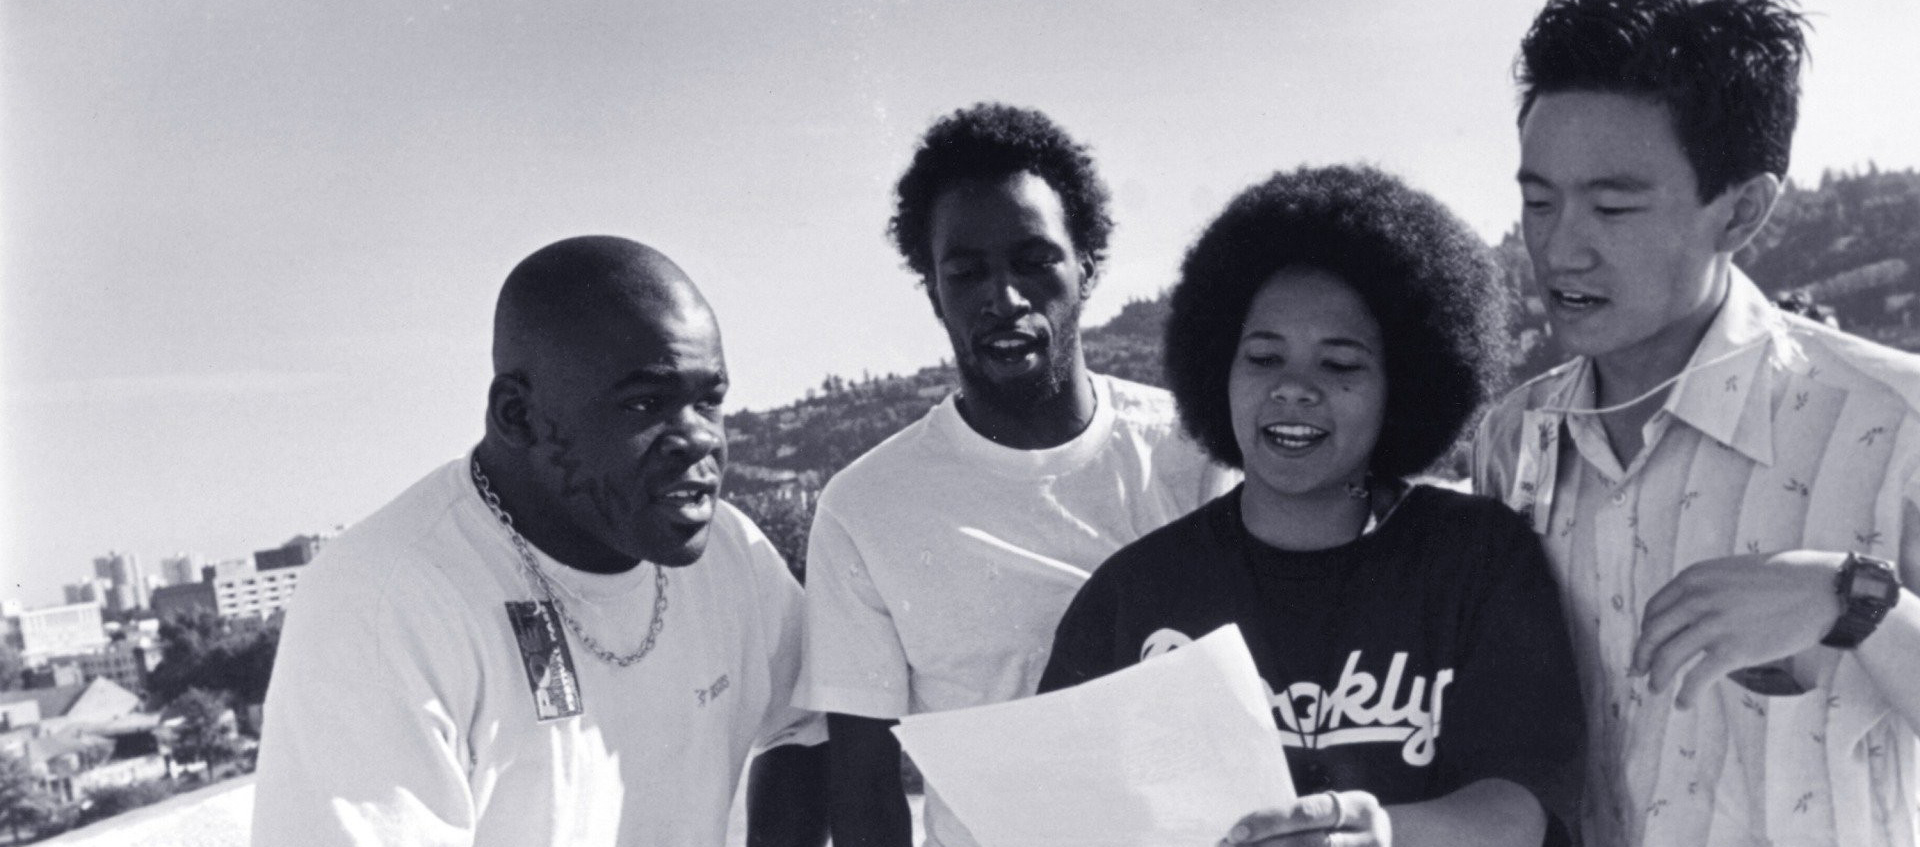 Two young Black men, a young Asian man, and a young Black woman stand together outside and read aloud from a sheet of paper the woman holds in front of her.